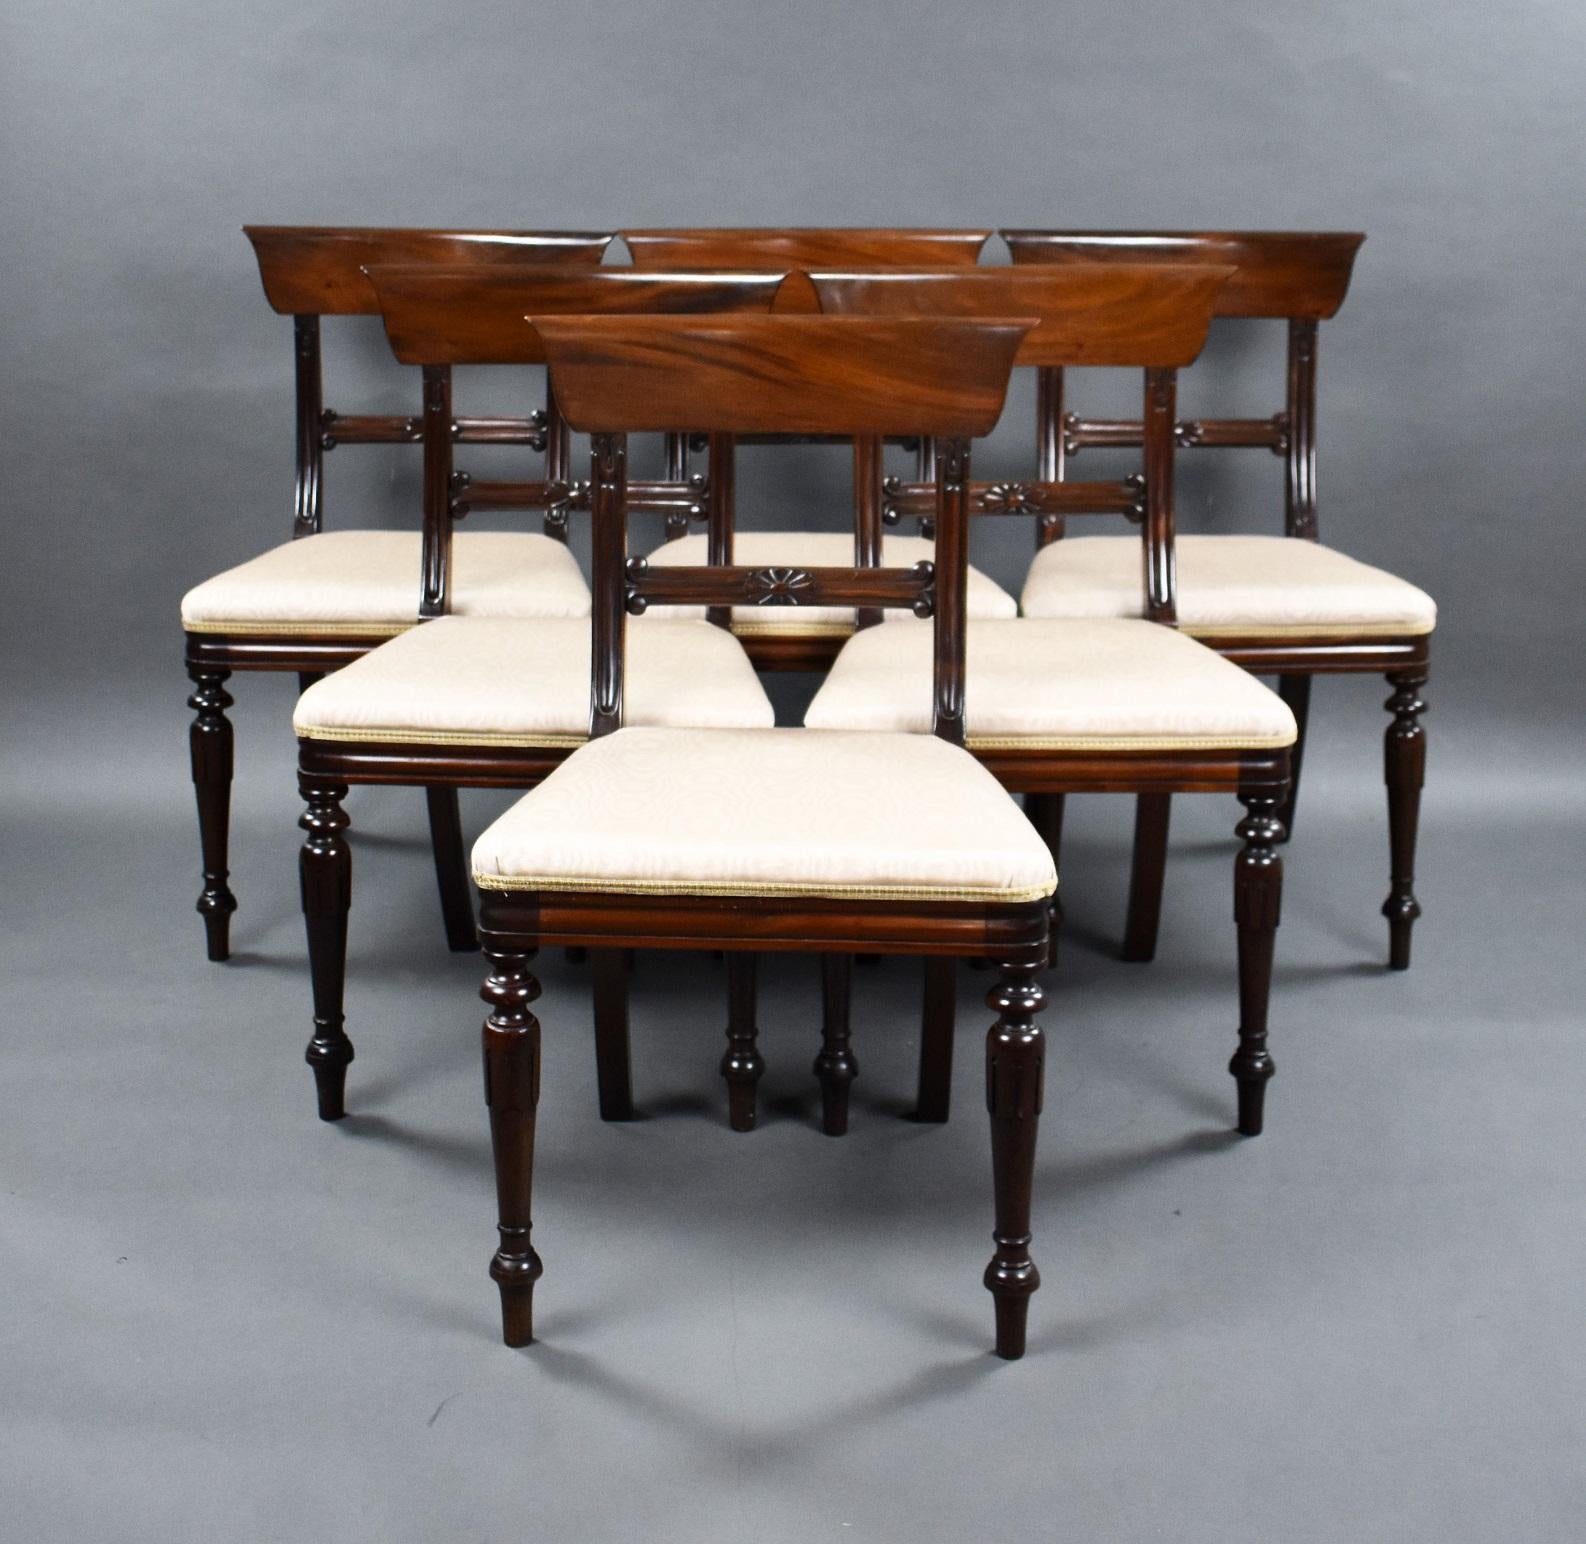 Set eight 1930s mahogany dining chairs comprising of six singles and two carver chairs in good condition having a nice curved back and standing on tapered turned legs, all structurally sound with upholstered seats.